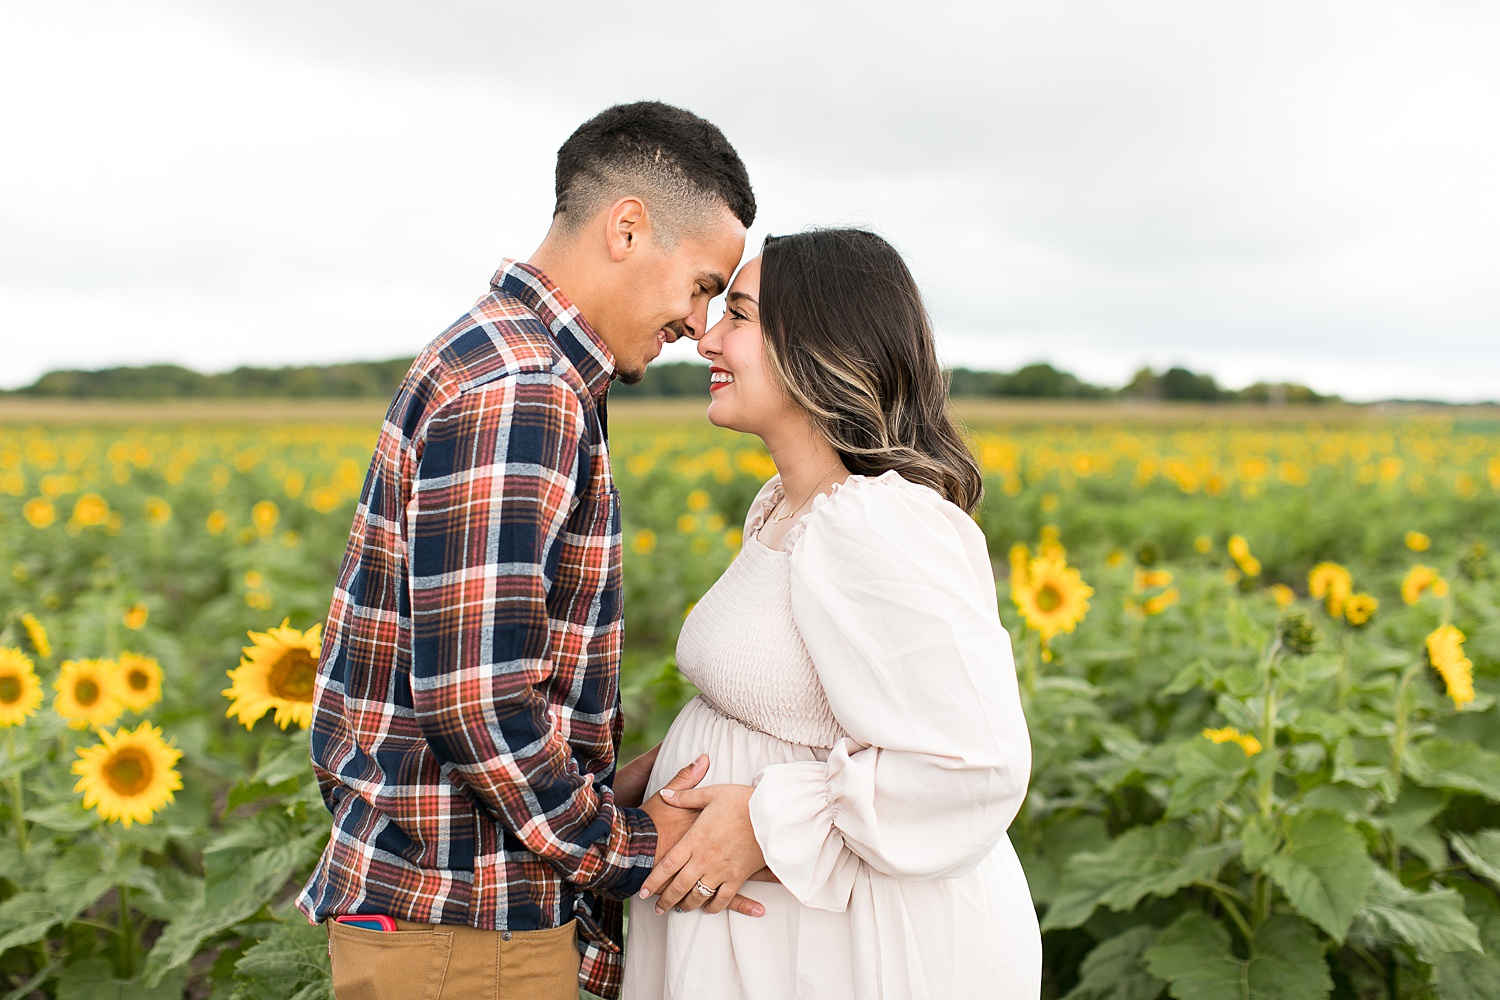 Maternity photography session at sunflower field in Murfreesboro TN